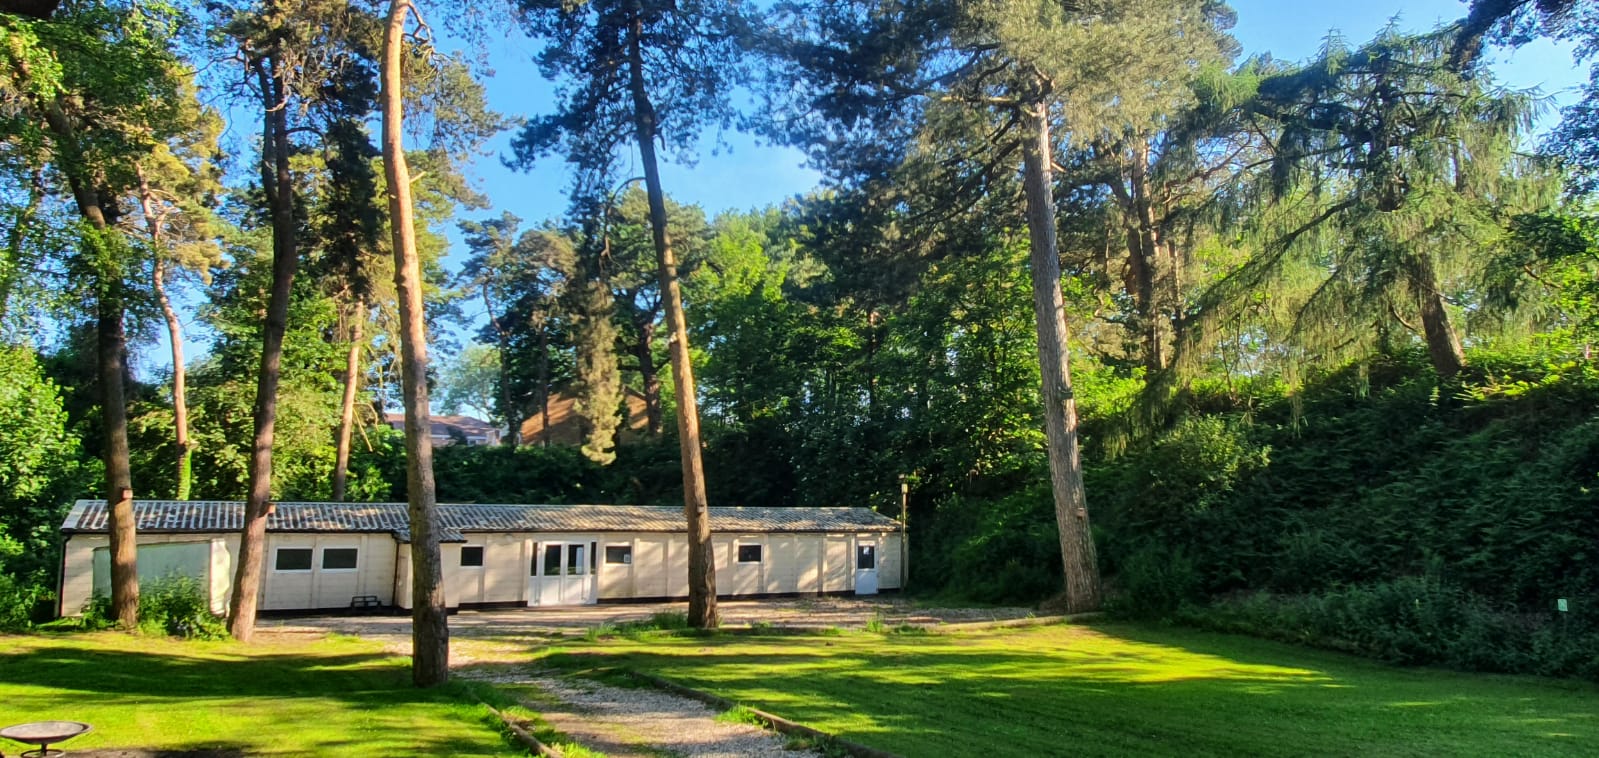 The grounds of Hellesdon Scout Hut